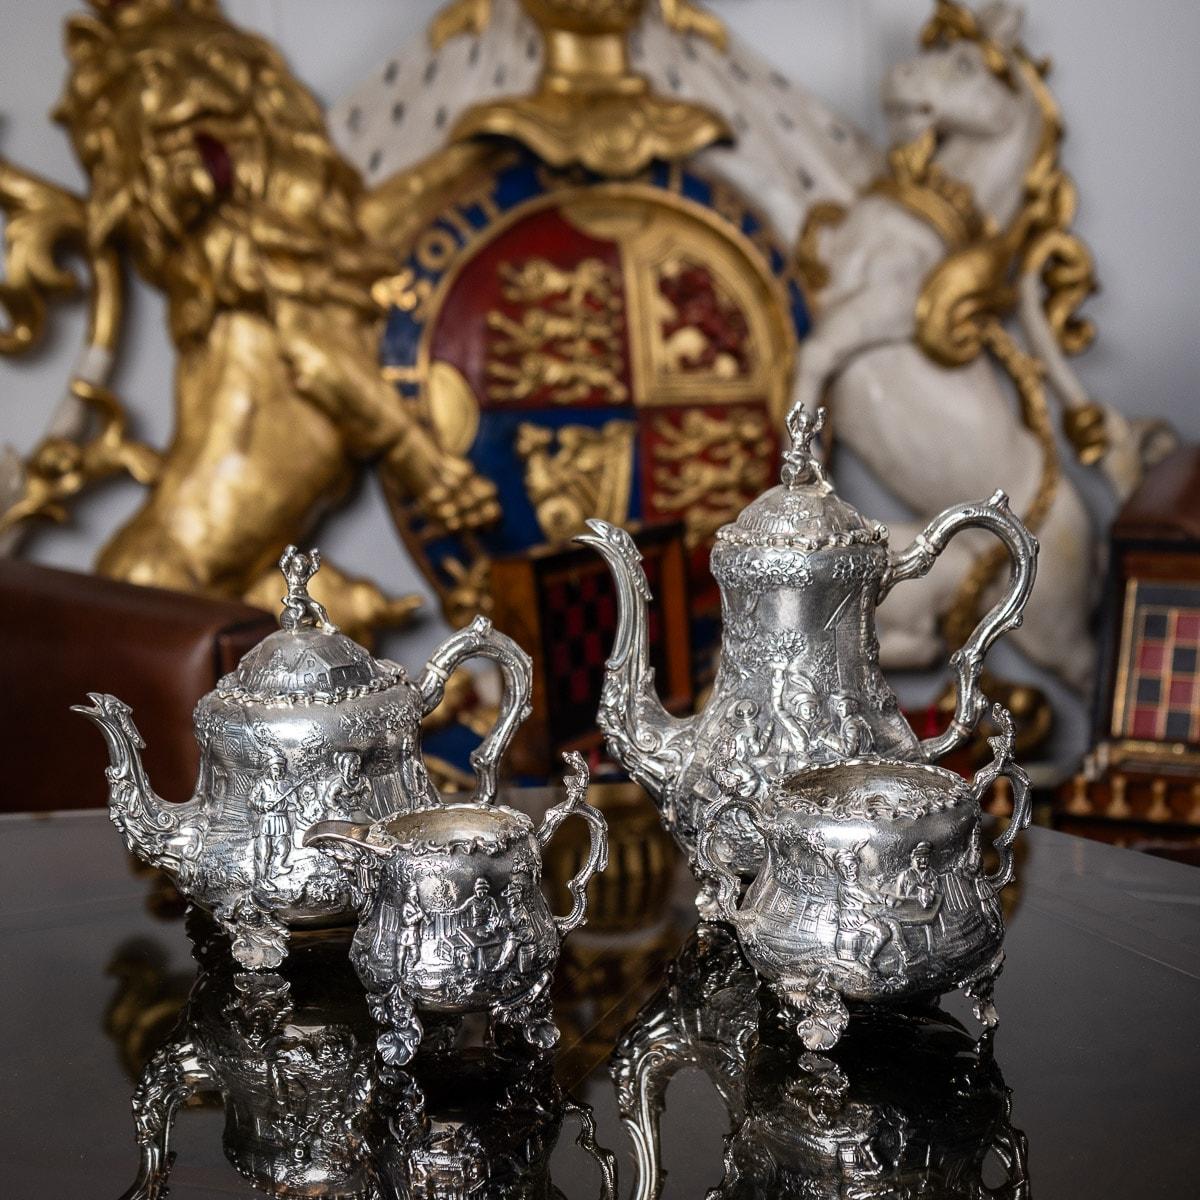 Antique 19th century Victorian unusual solid silver four-piece tea and coffee set, comprising of coffee pot, teapot, sugar bowl and milk jug, each pear-form body is chased and applied with rustic scenes of peasants merry-making, in the style of the